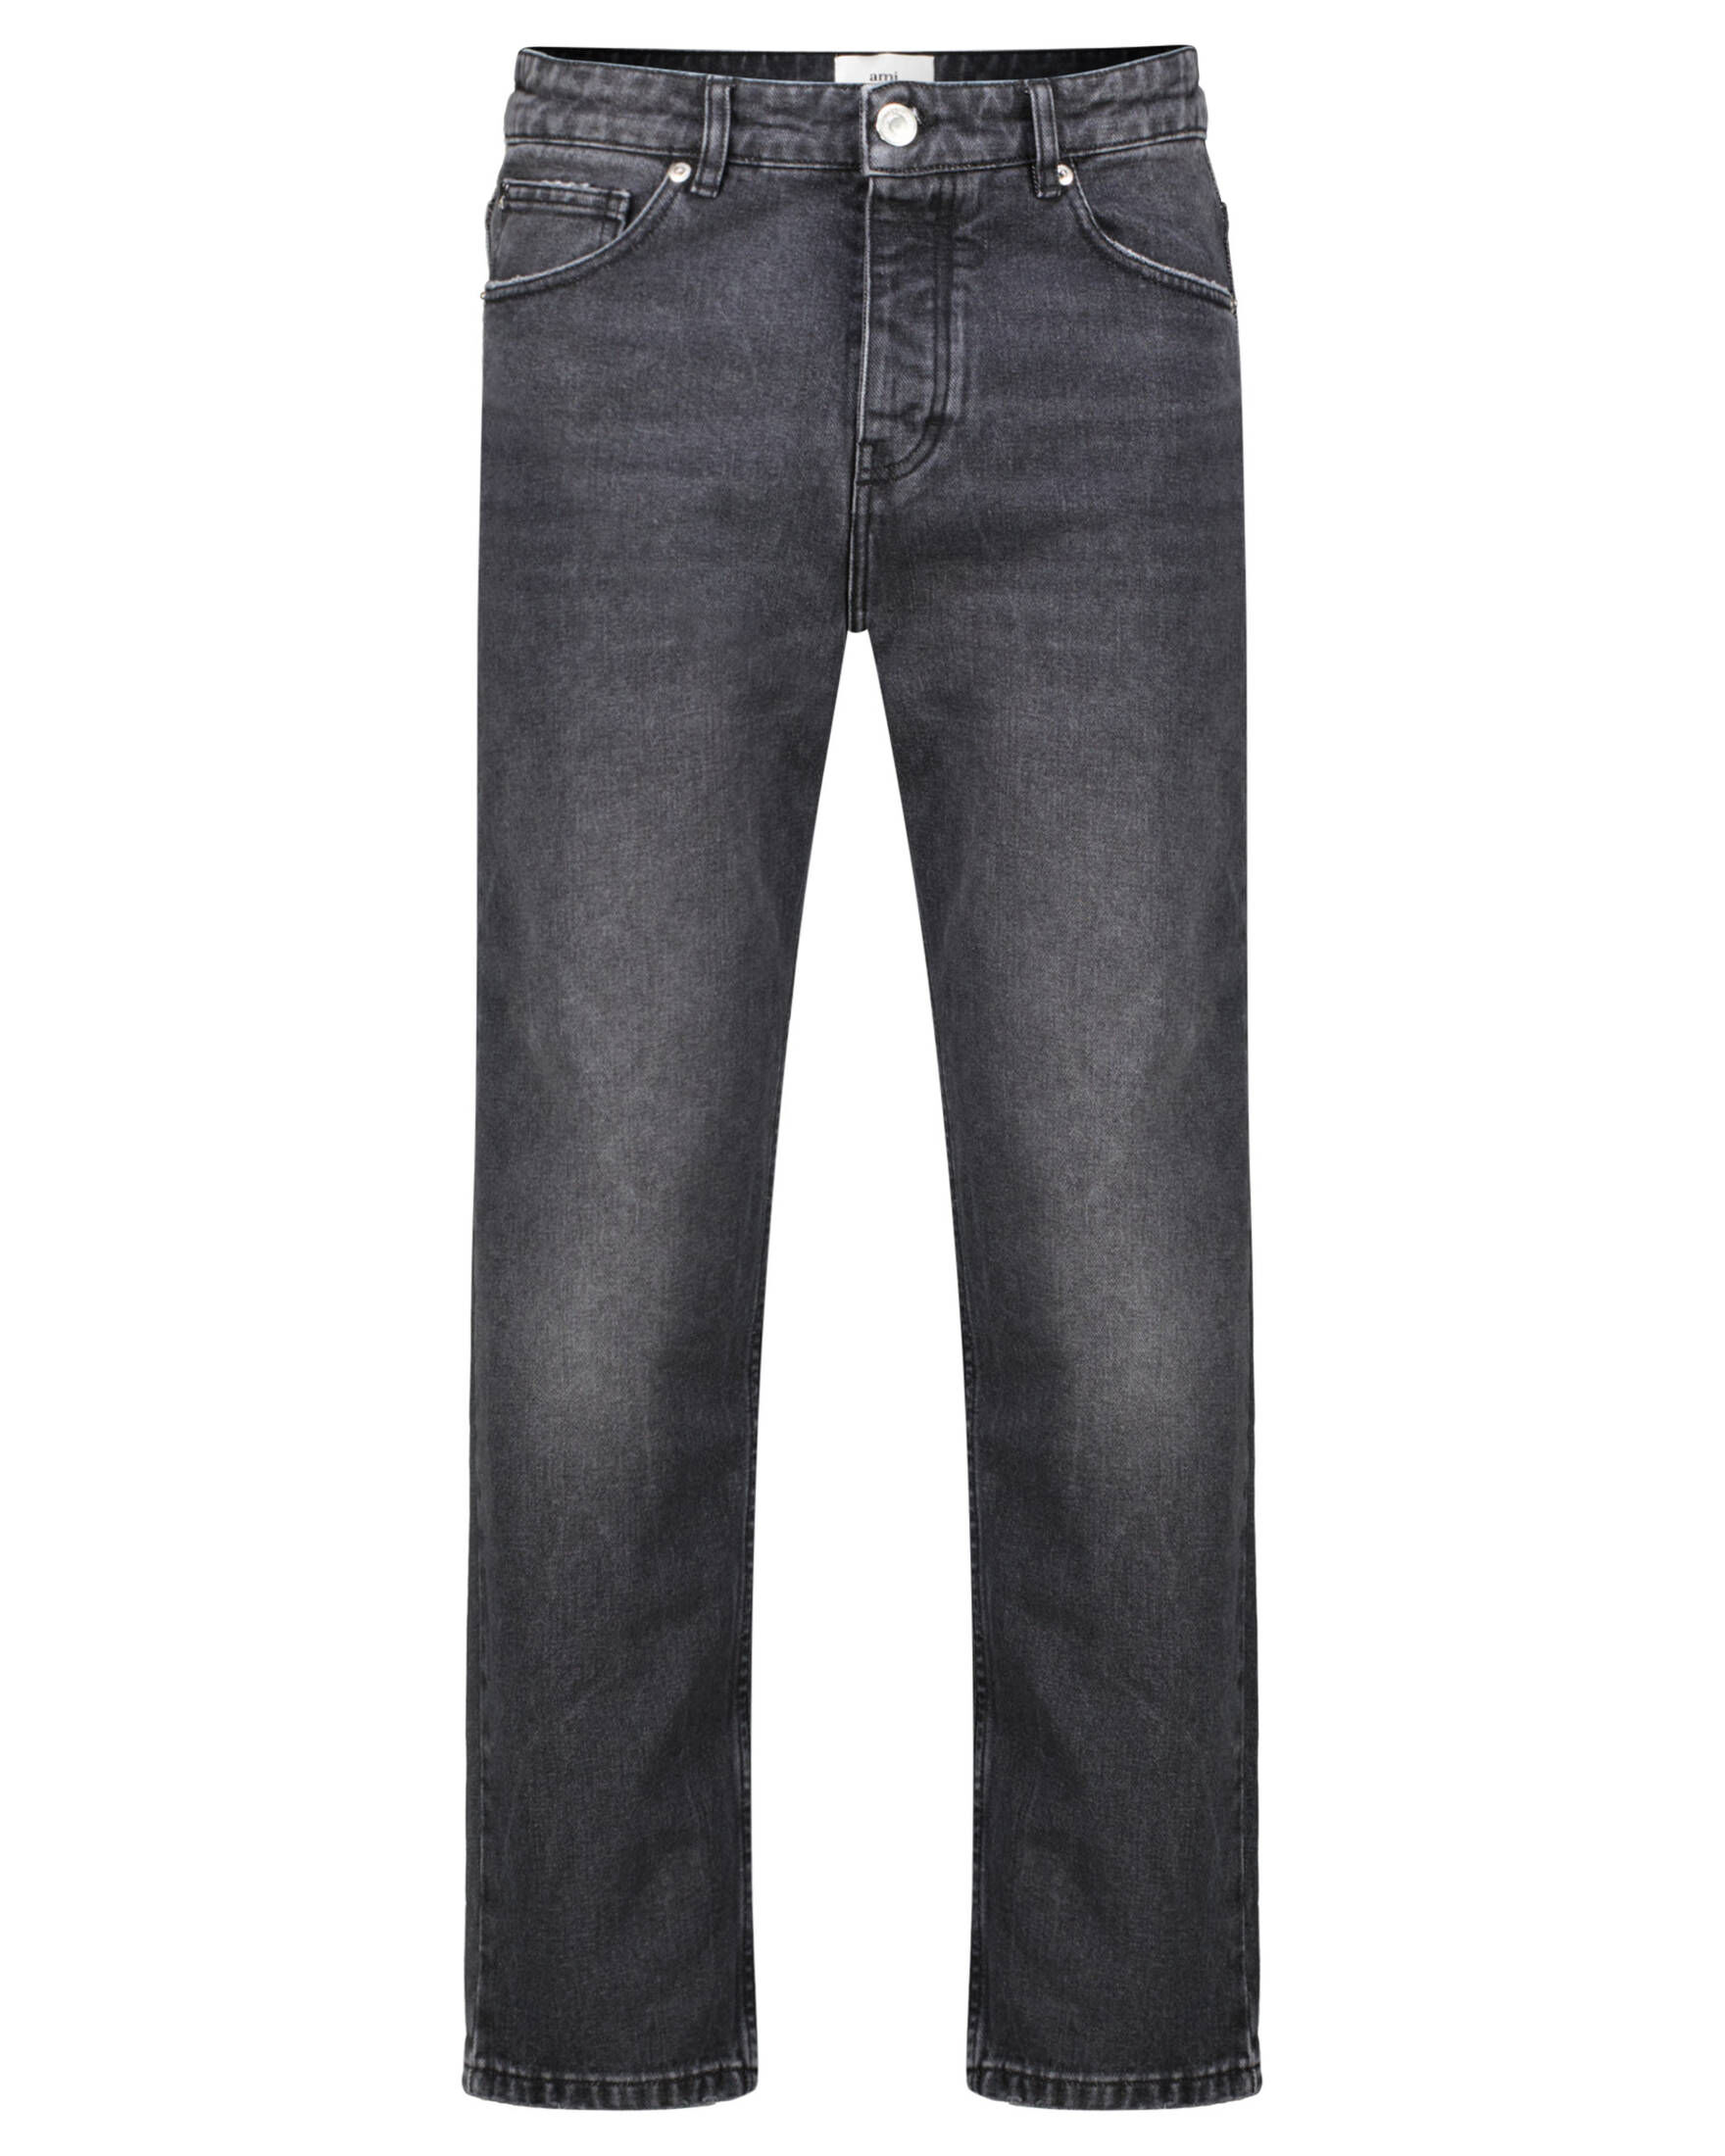 Herren Jeans Tapered Fit